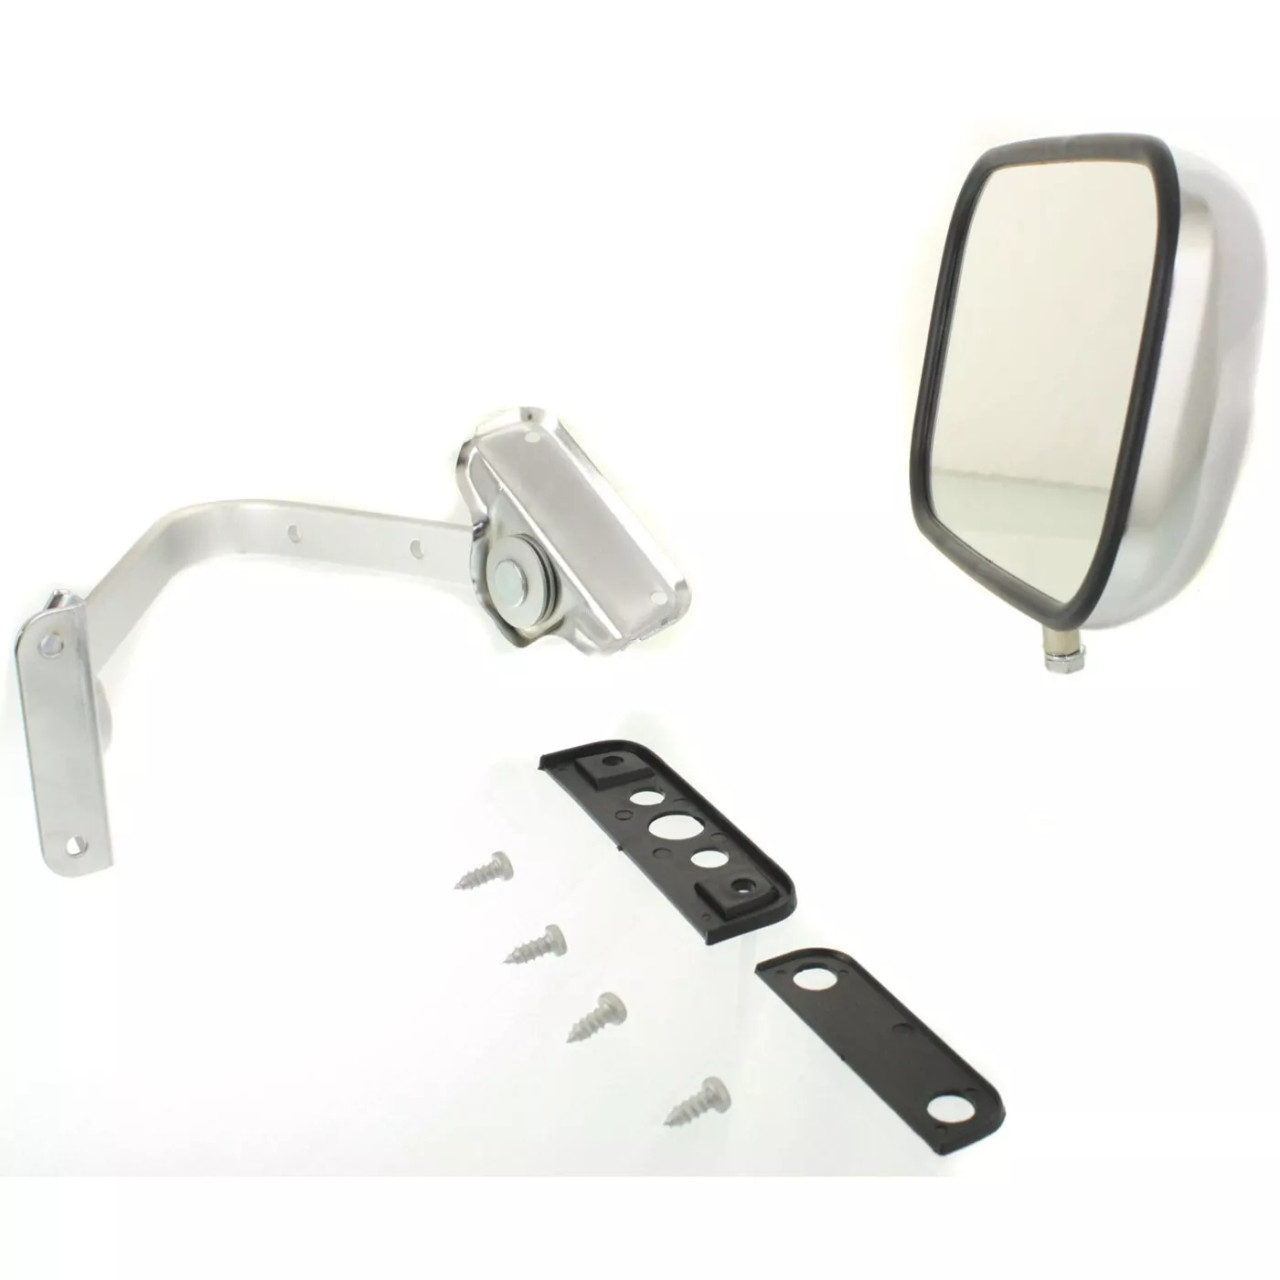 Set of 2 Mirrors  Driver & Passenger Side for F250 Truck F350 F150 Bronco Pair